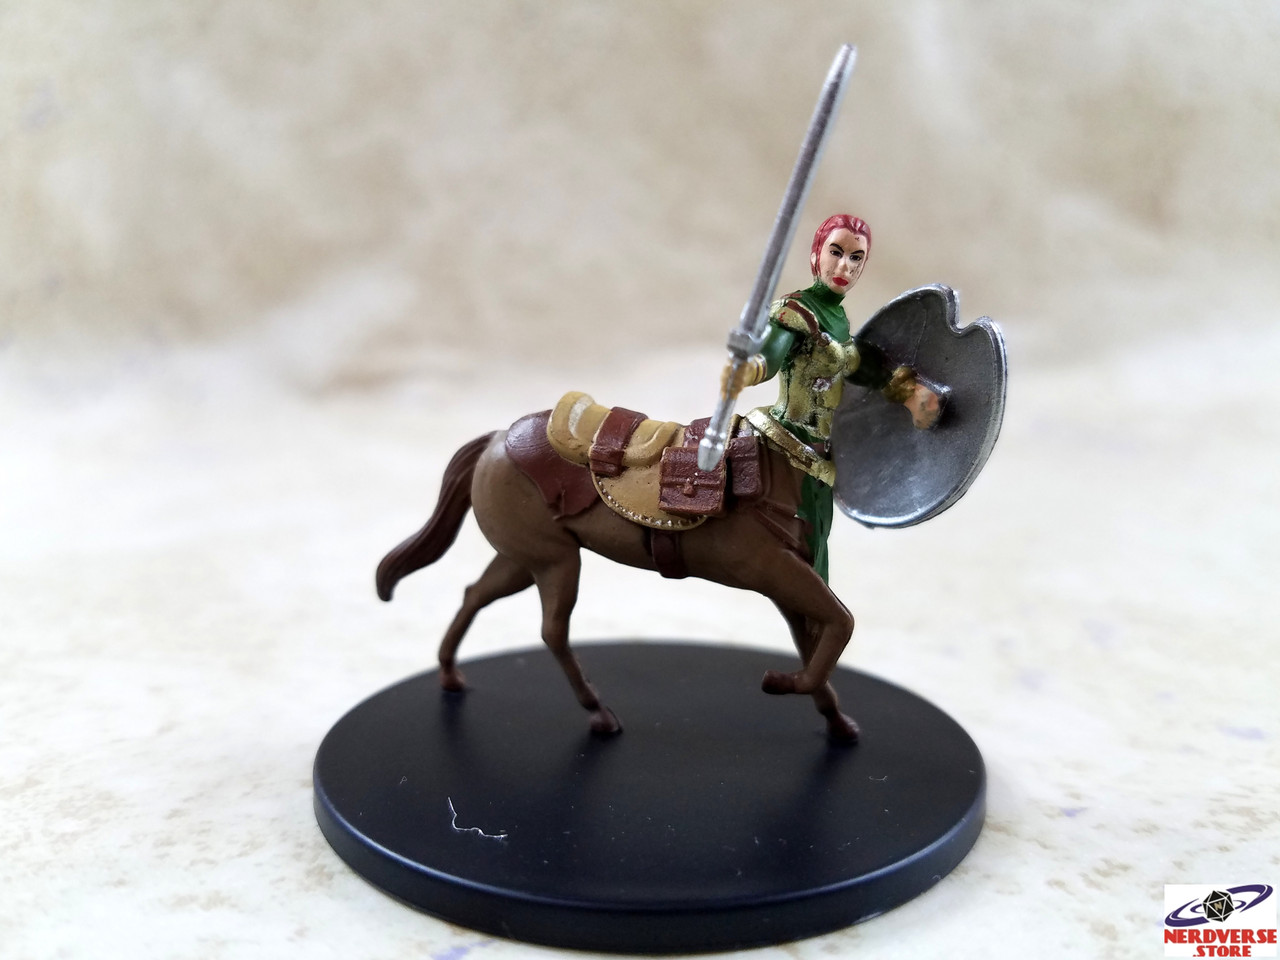 Centaur Outrider Sword #32a Pathfinder City of Lost Omens D&D Miniatures